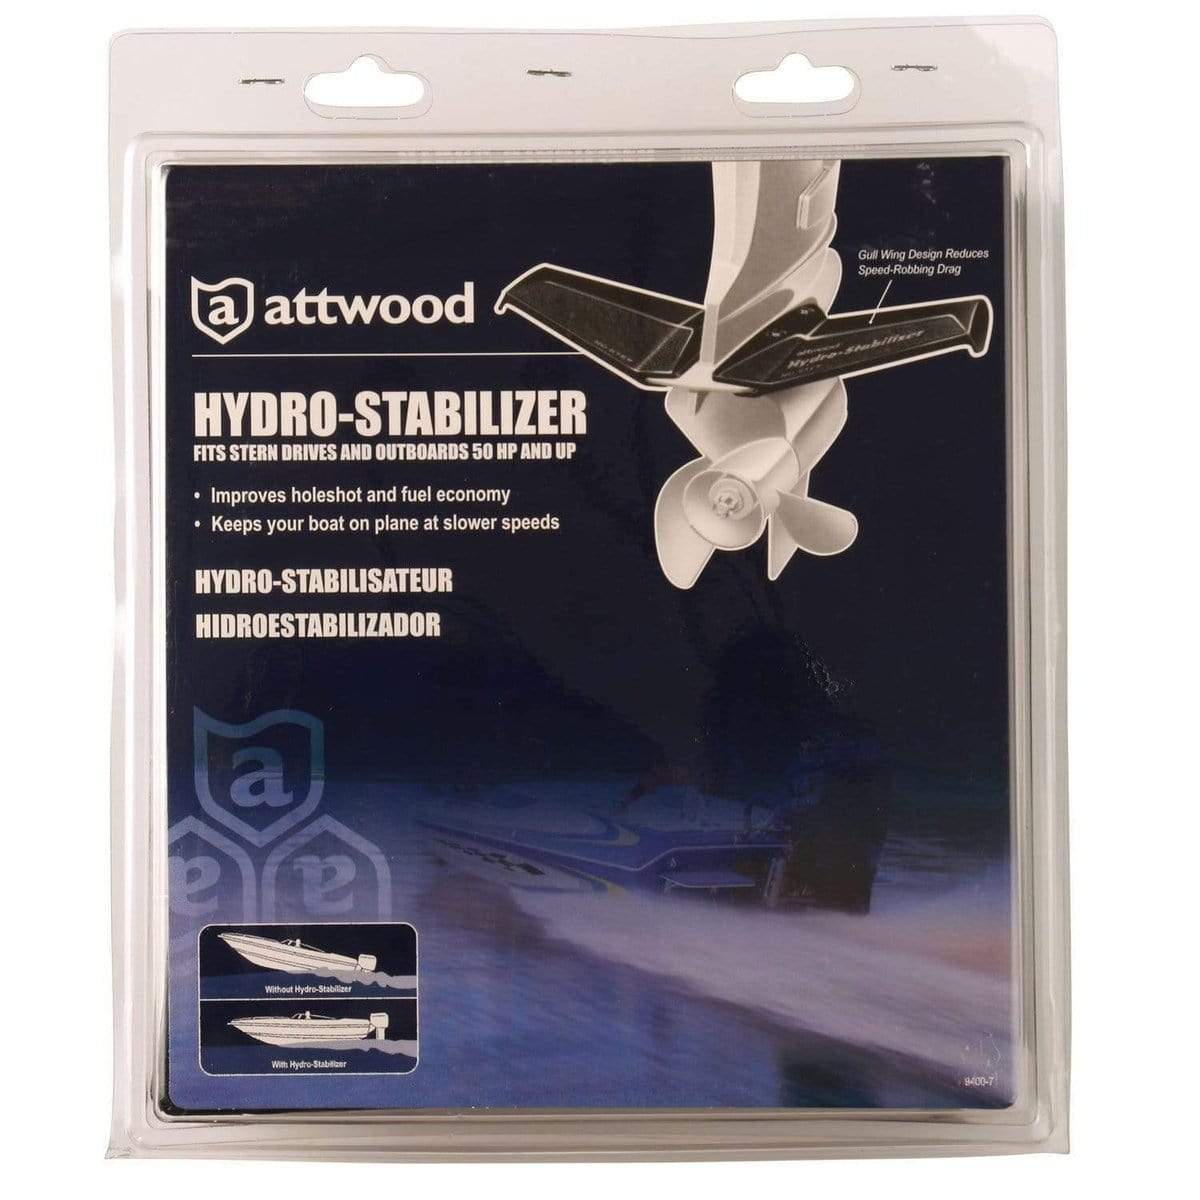 Attwood Marine Qualifies for Free Shipping Attwood Hydro-Stabilizer 50 HP and Above #9400-7